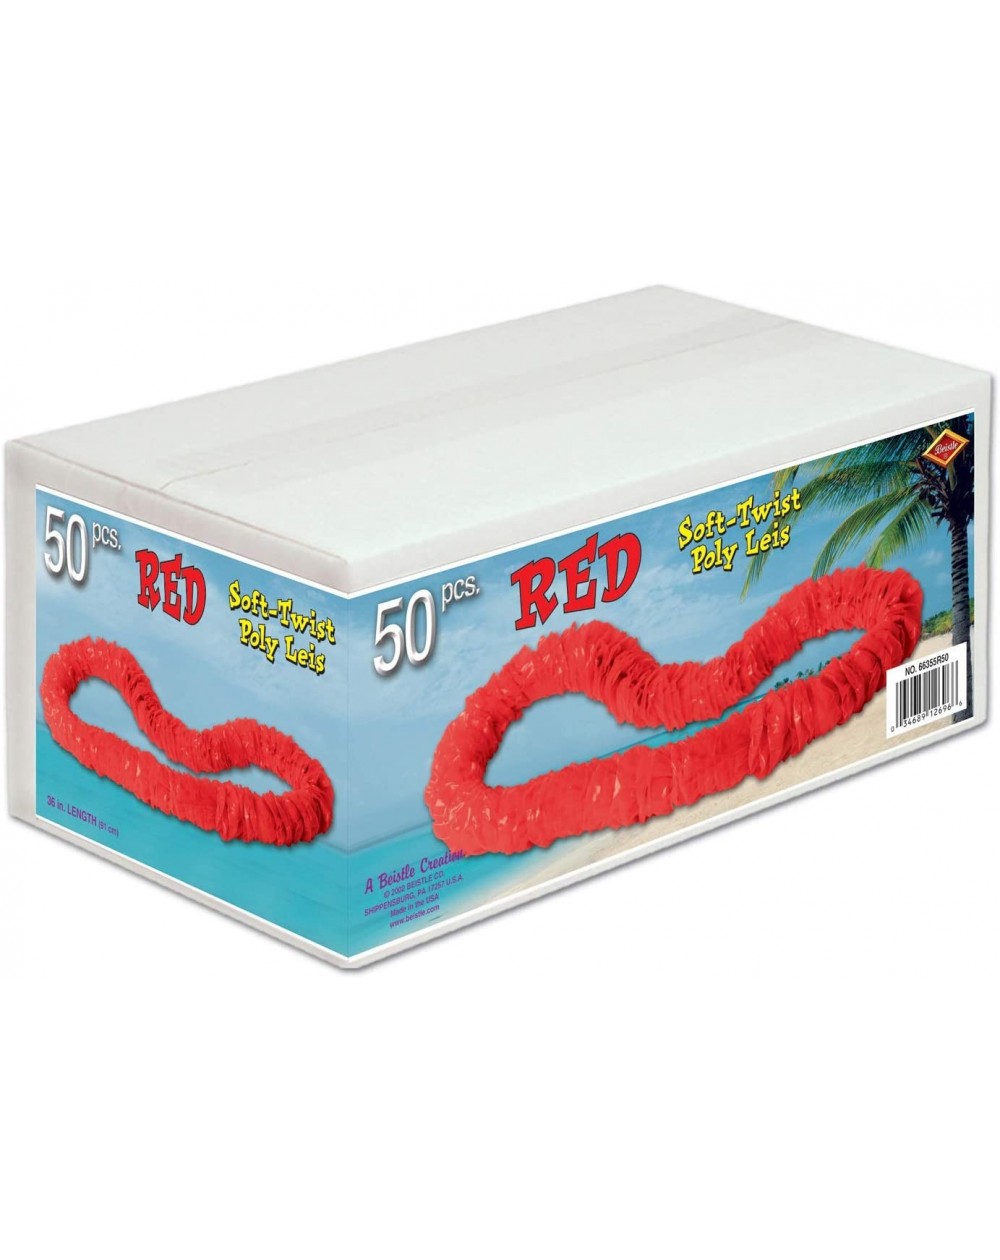 Favors Soft-Twist Poly Leis w/Labeled Box (red)- 50 Red Leis Per Package - CB116U75R7F $20.23